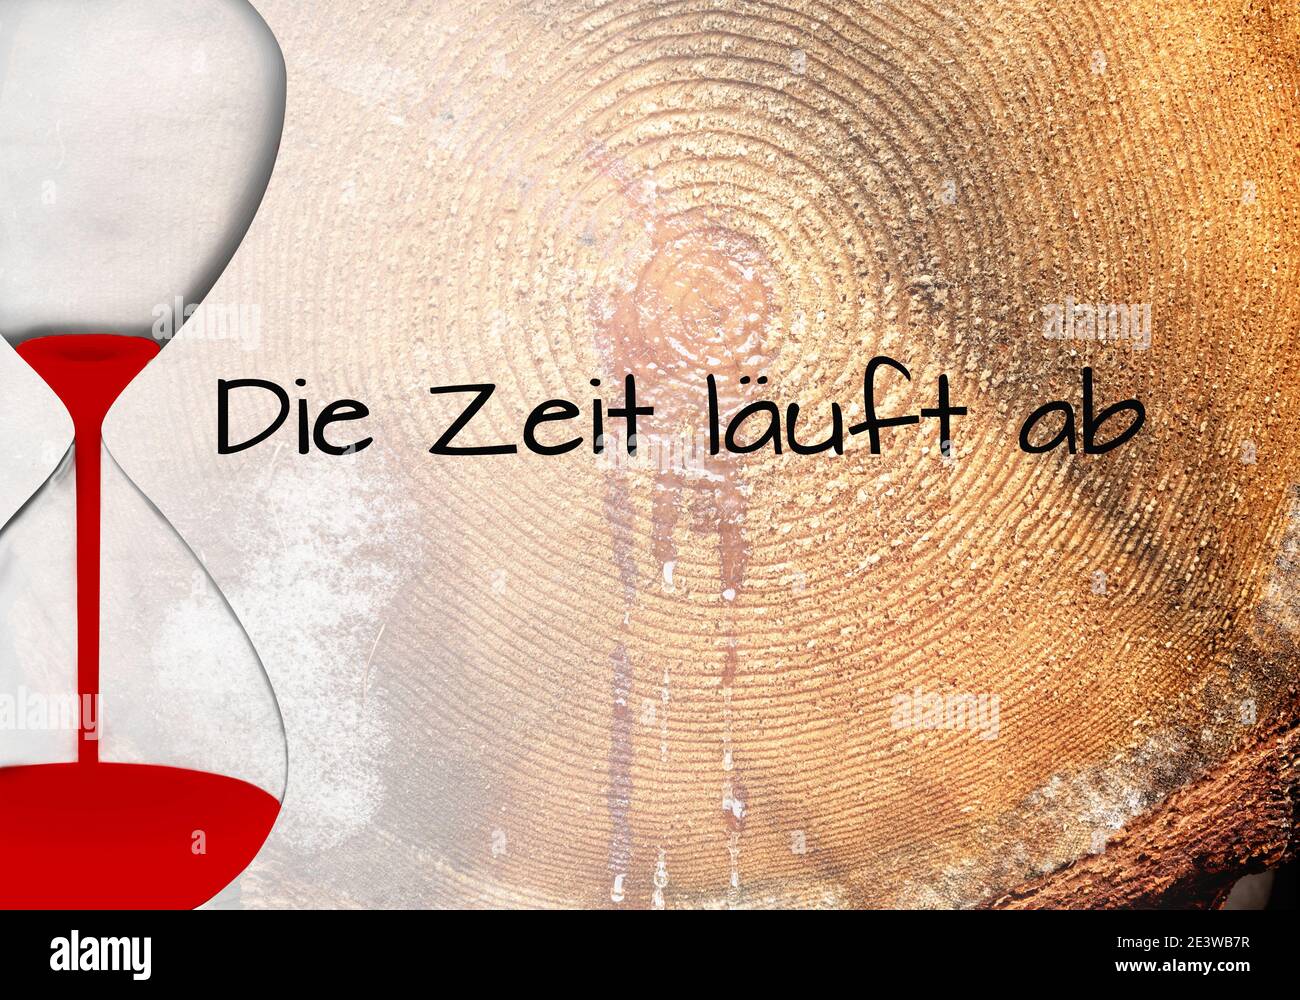 Egg timer with text: Die Zeit läuft ab -Time runs out on wooden background. Stock Photo